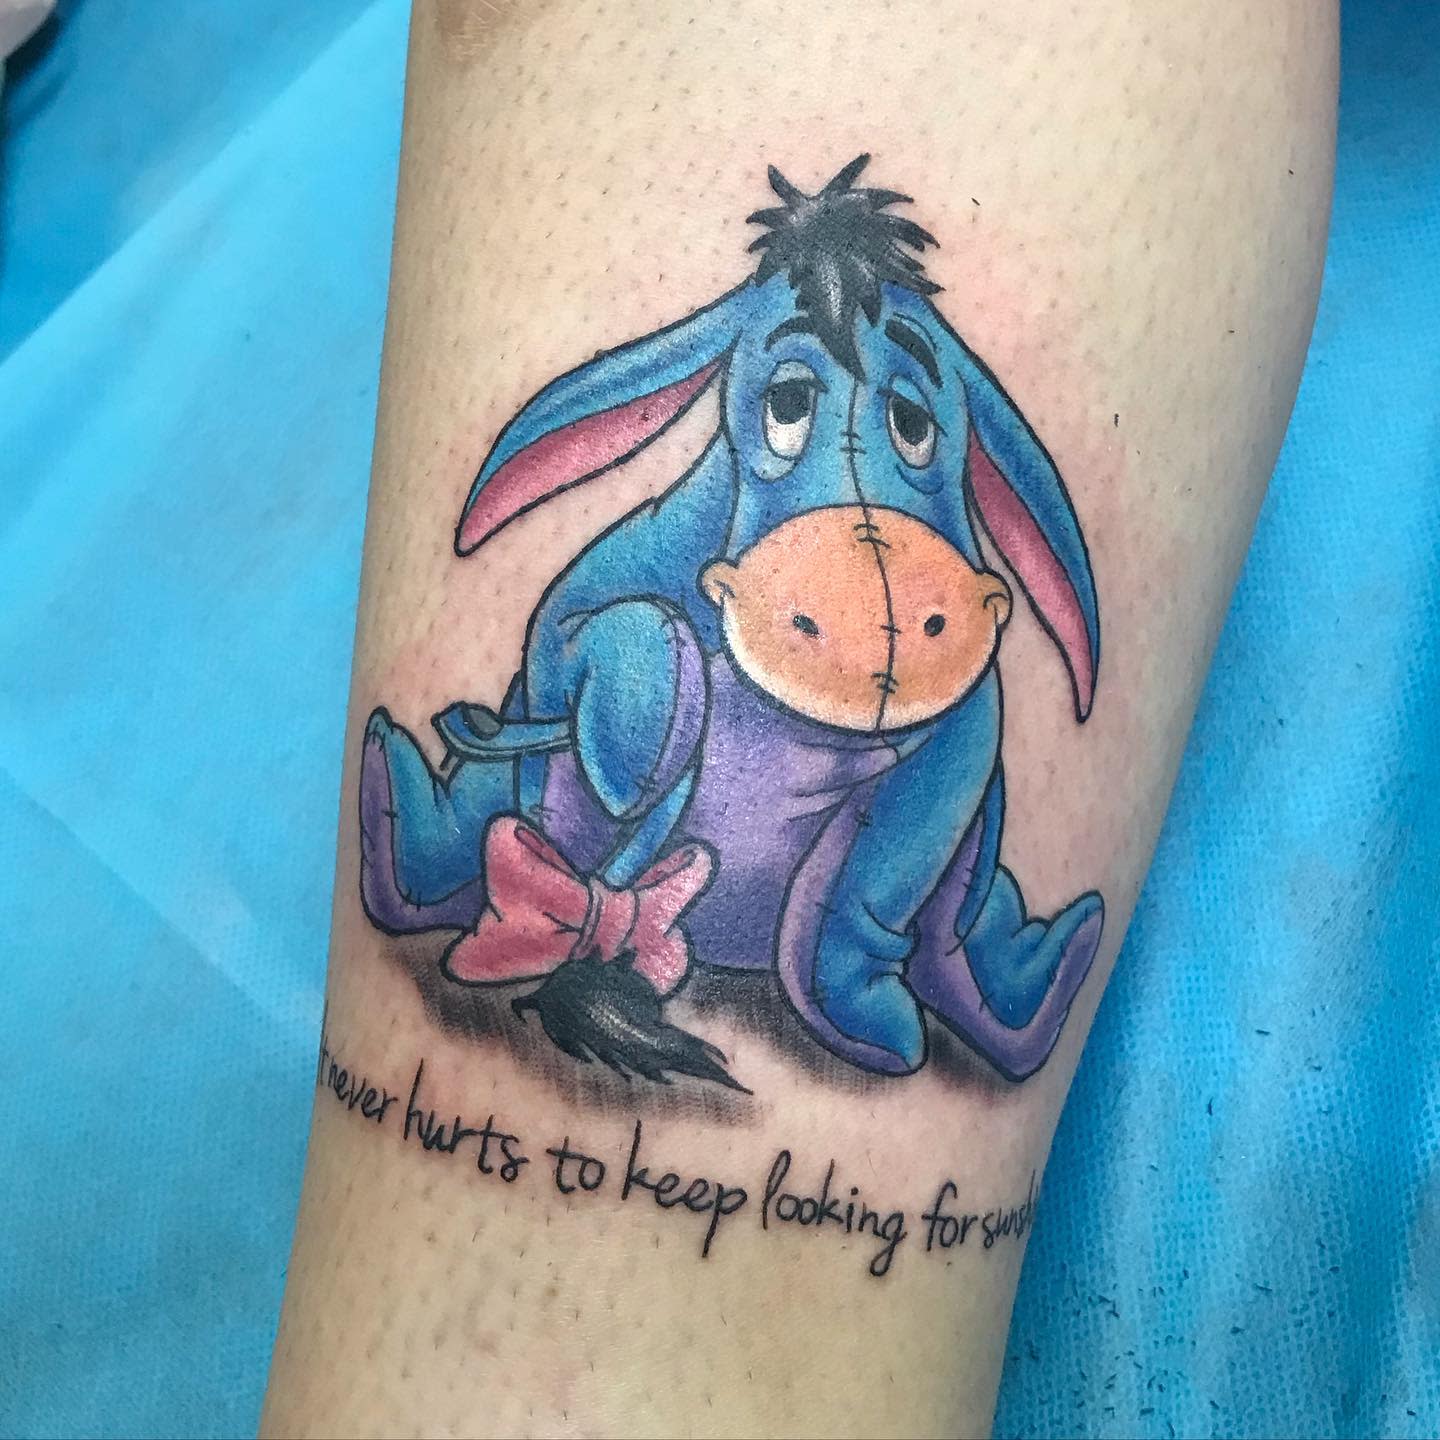 Weeds are flowers too once you get to know them Eeyore tattoo check  Eeyore  tattoo Eyore tattoo Disney tattoos